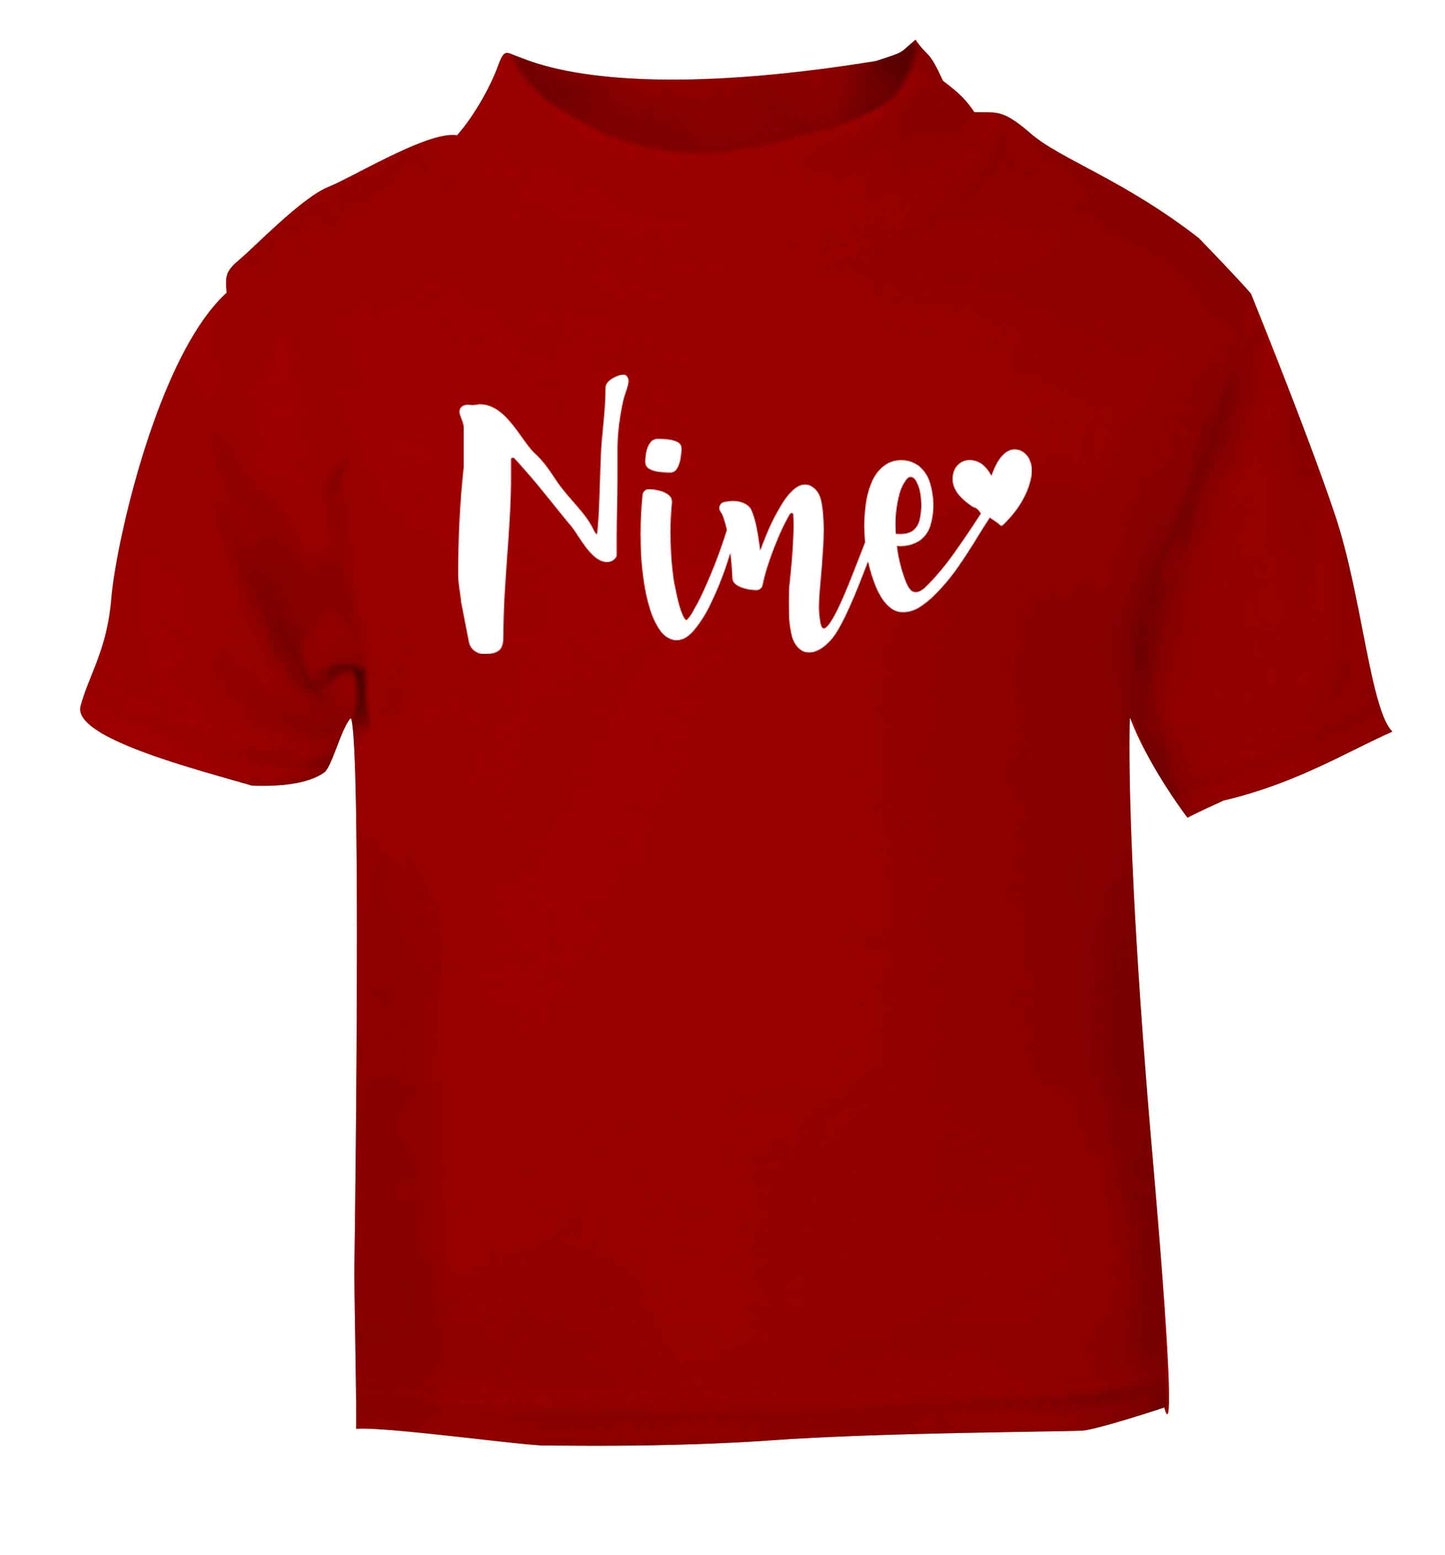 Nine and heart red baby toddler Tshirt 2 Years